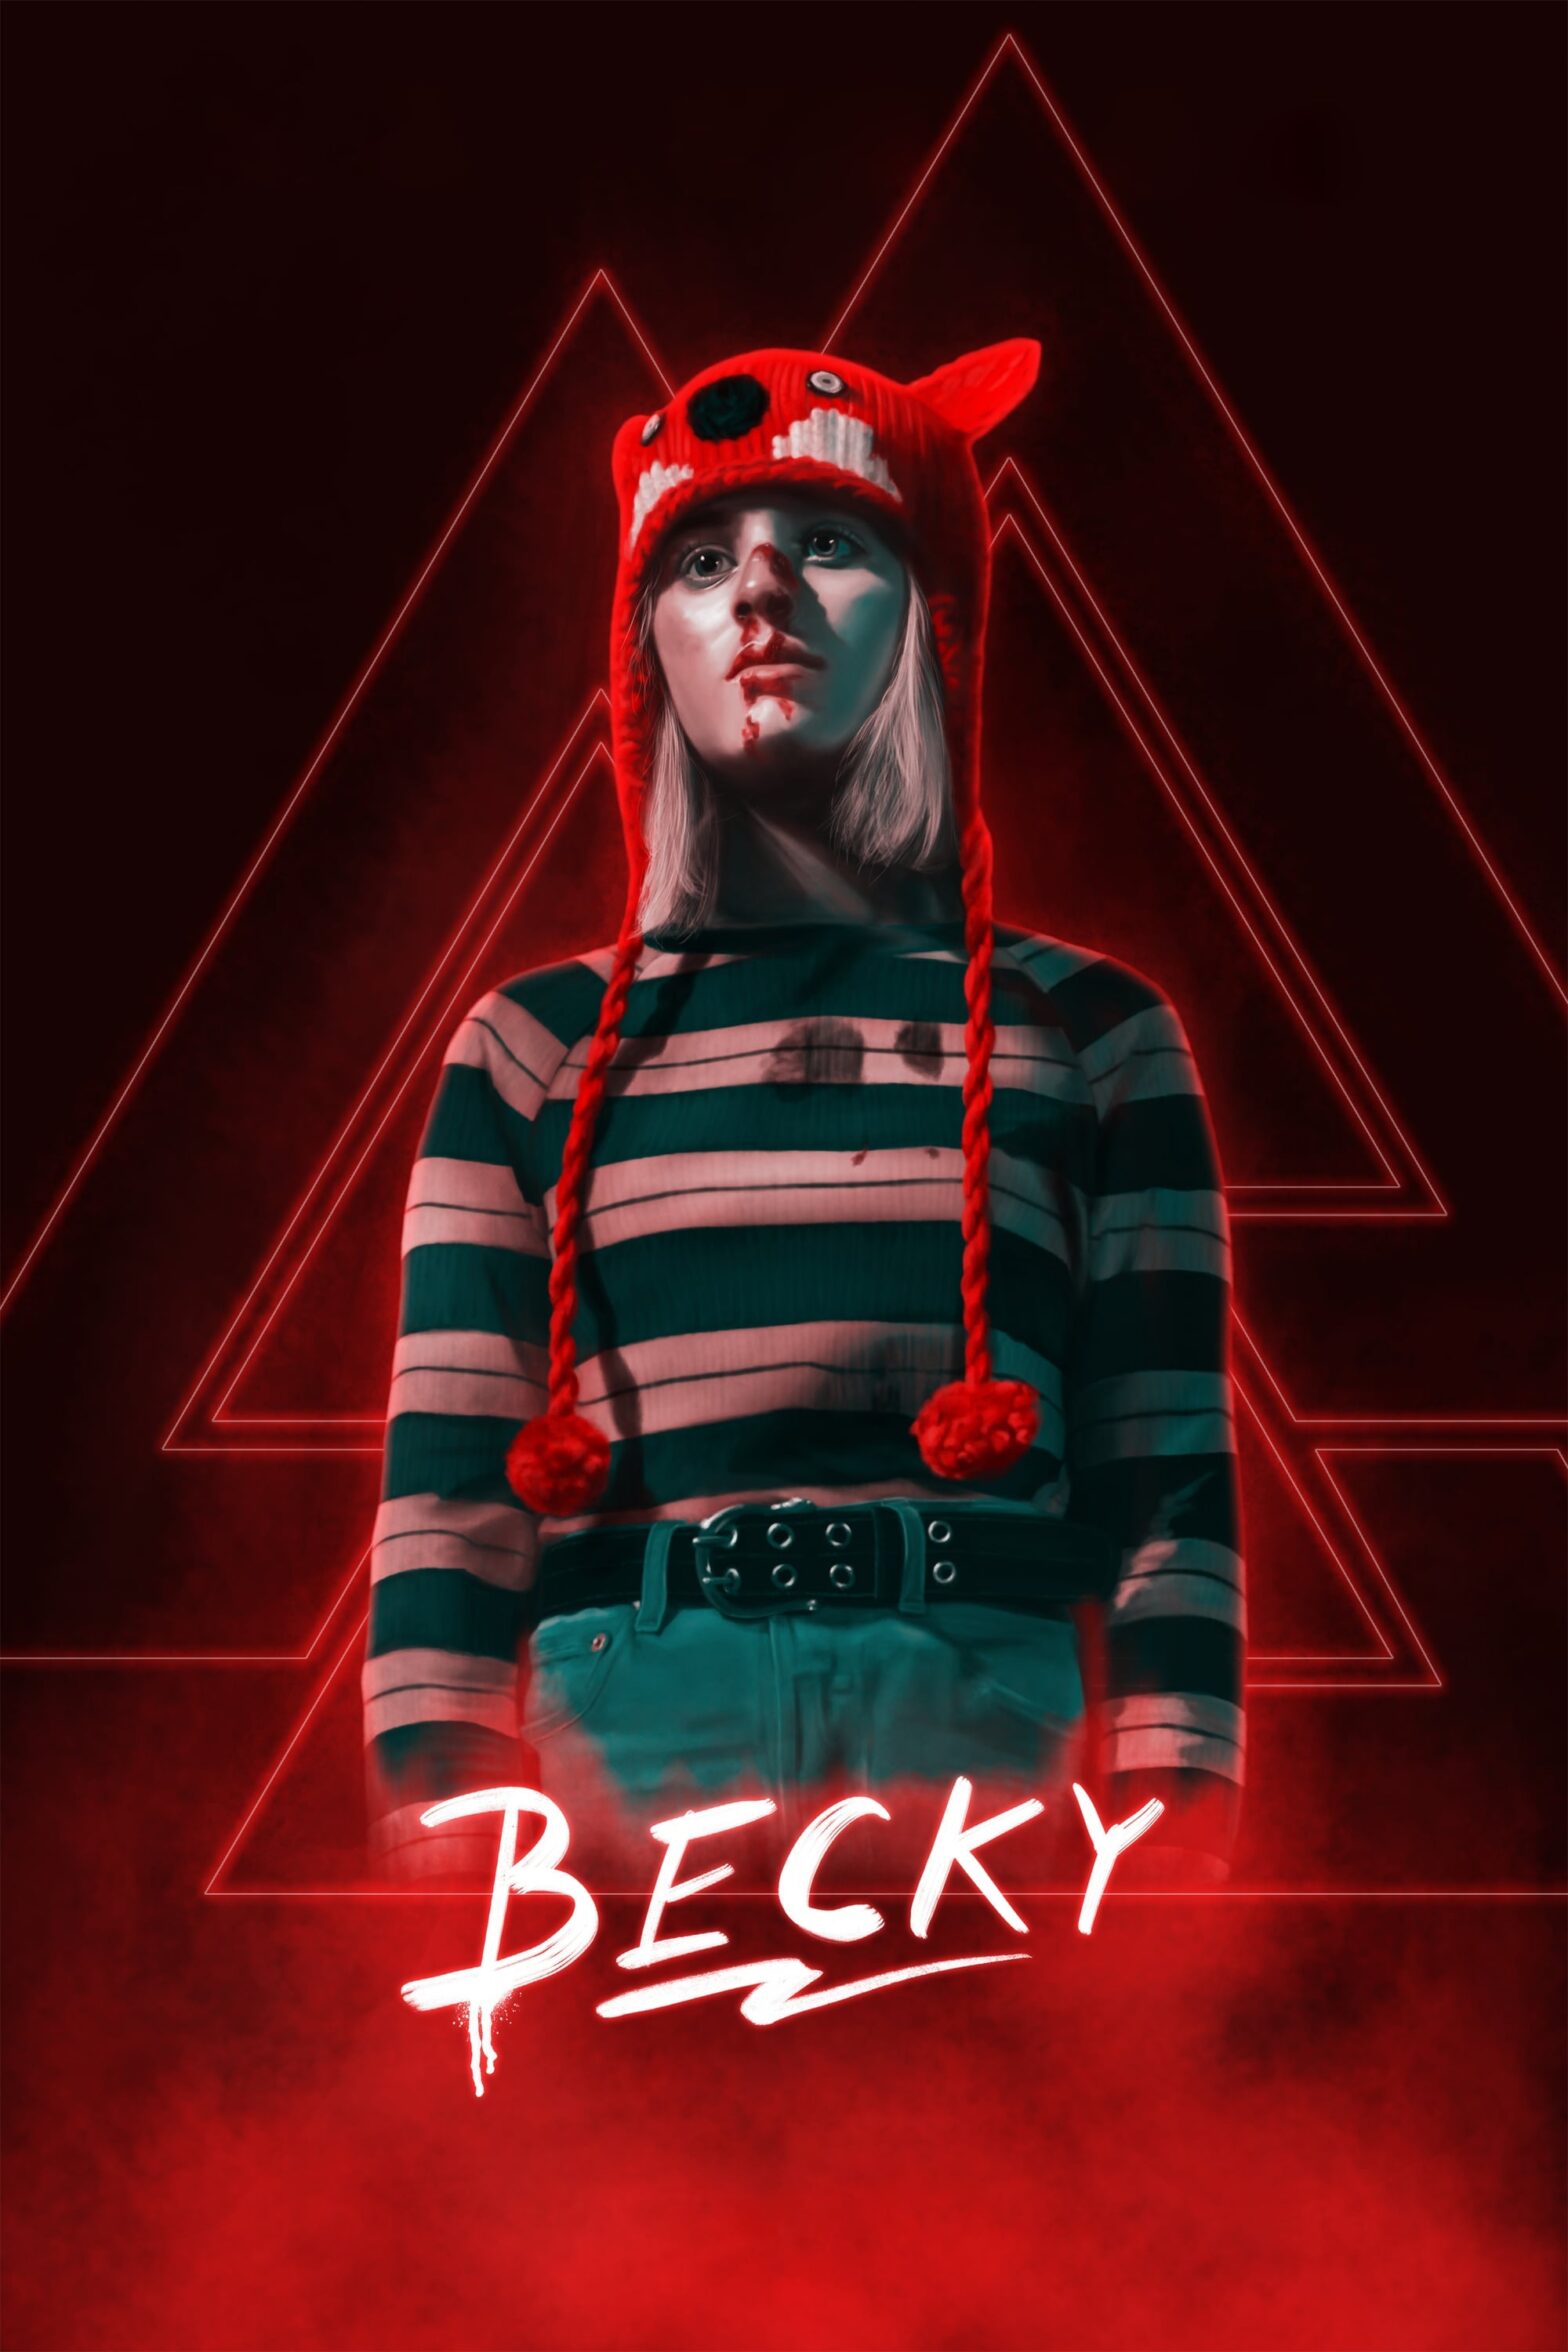 Poster for the movie "Becky"